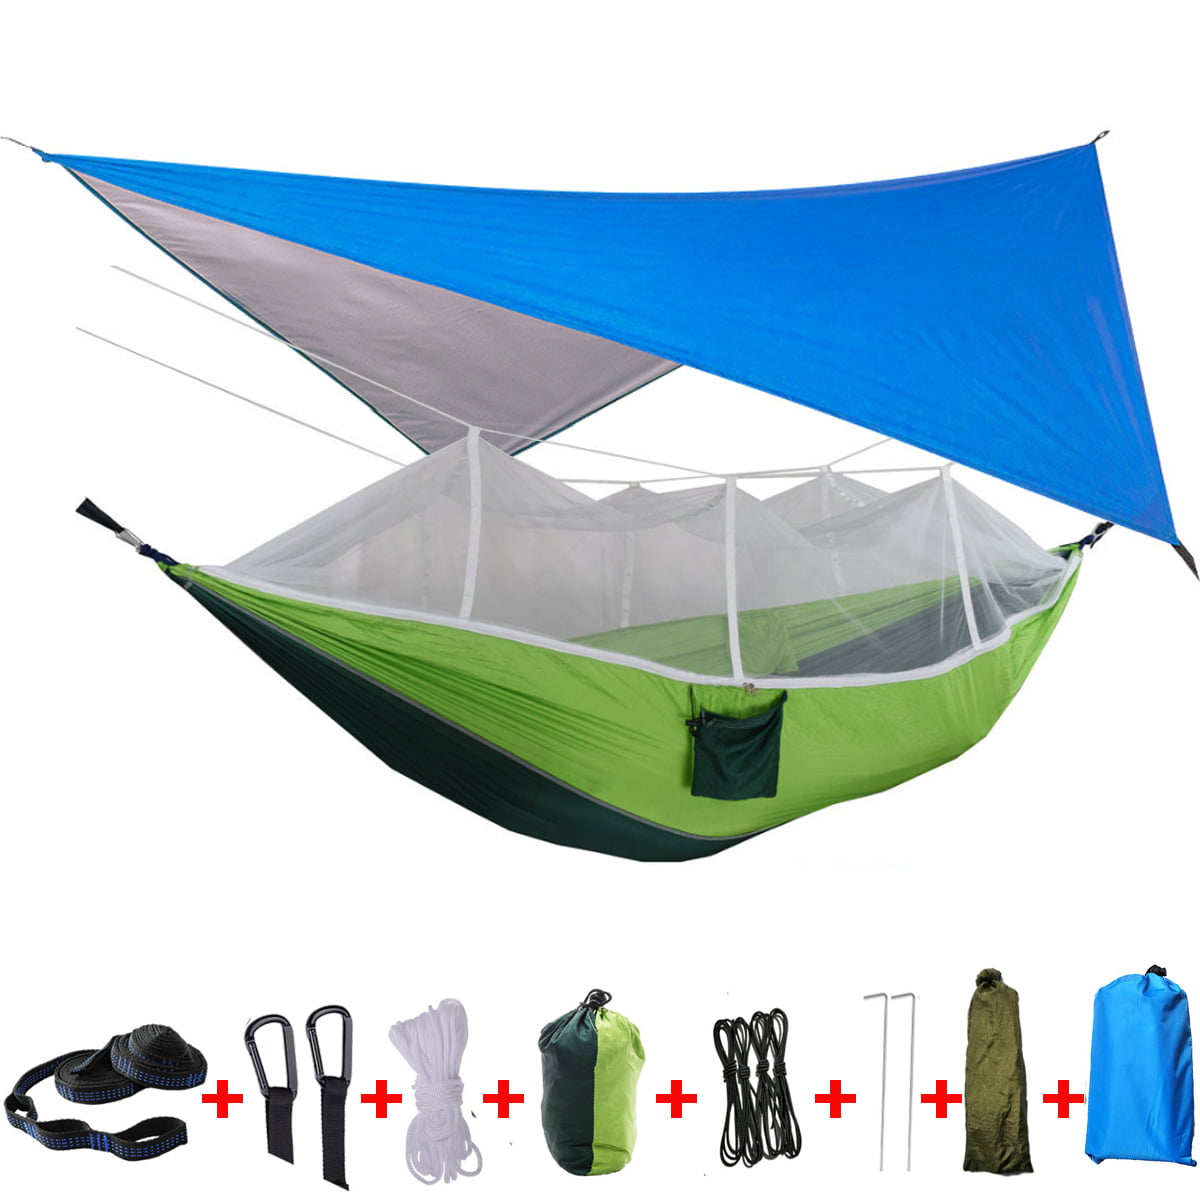 2 Person Outdoor Travel Double Hanging Bed Camping Hammock Tent Mosquito Net Set